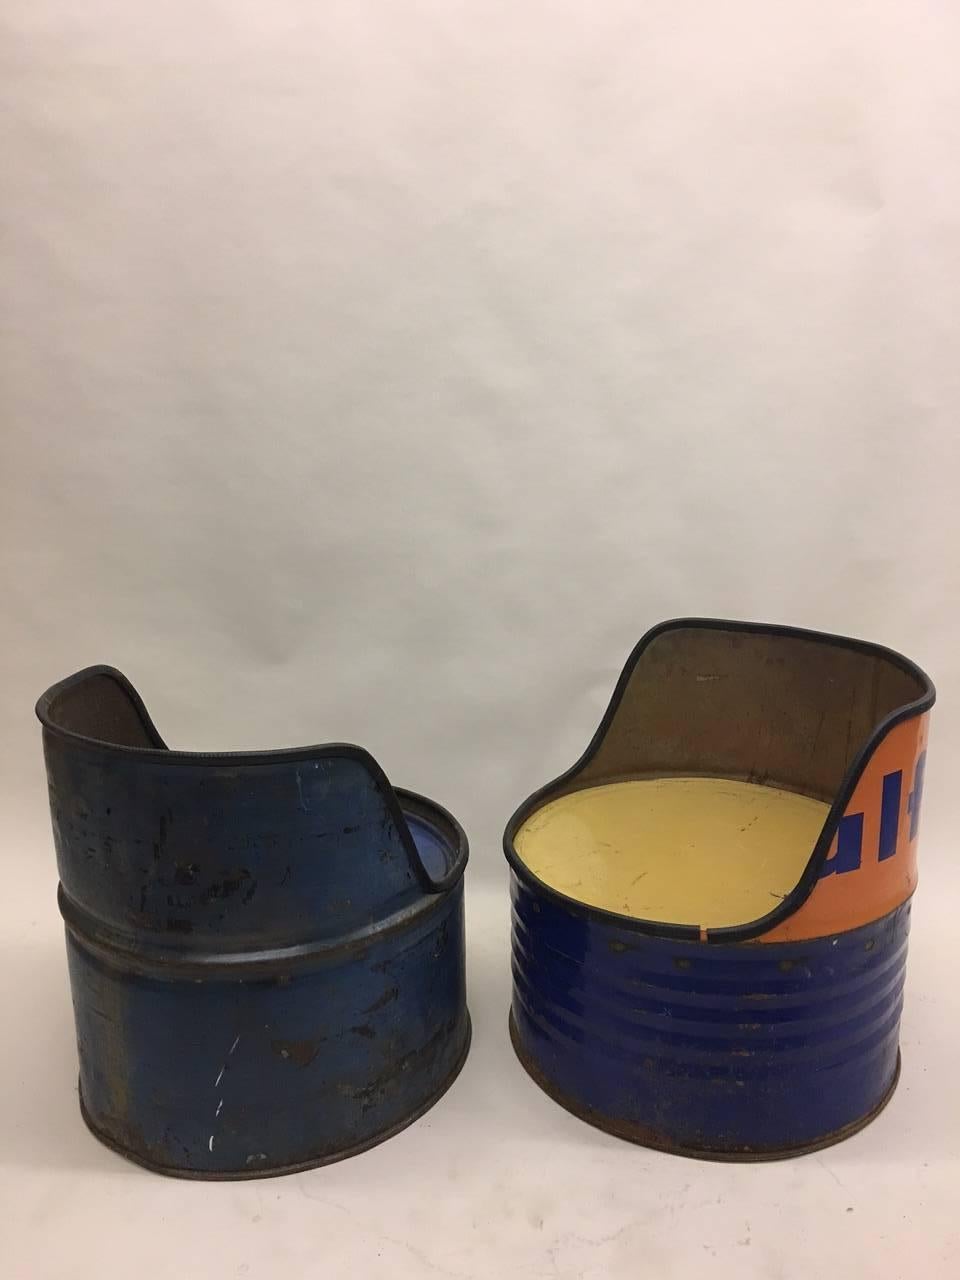 Pair of Artist conceived, Industrial design armchairs or club chairs re-purposed from Gulf Oil barrels and reflecting a modern 1960s counter-cultural aesthetic emphasizing the use of every day materials in the art making process. Andy Warhol